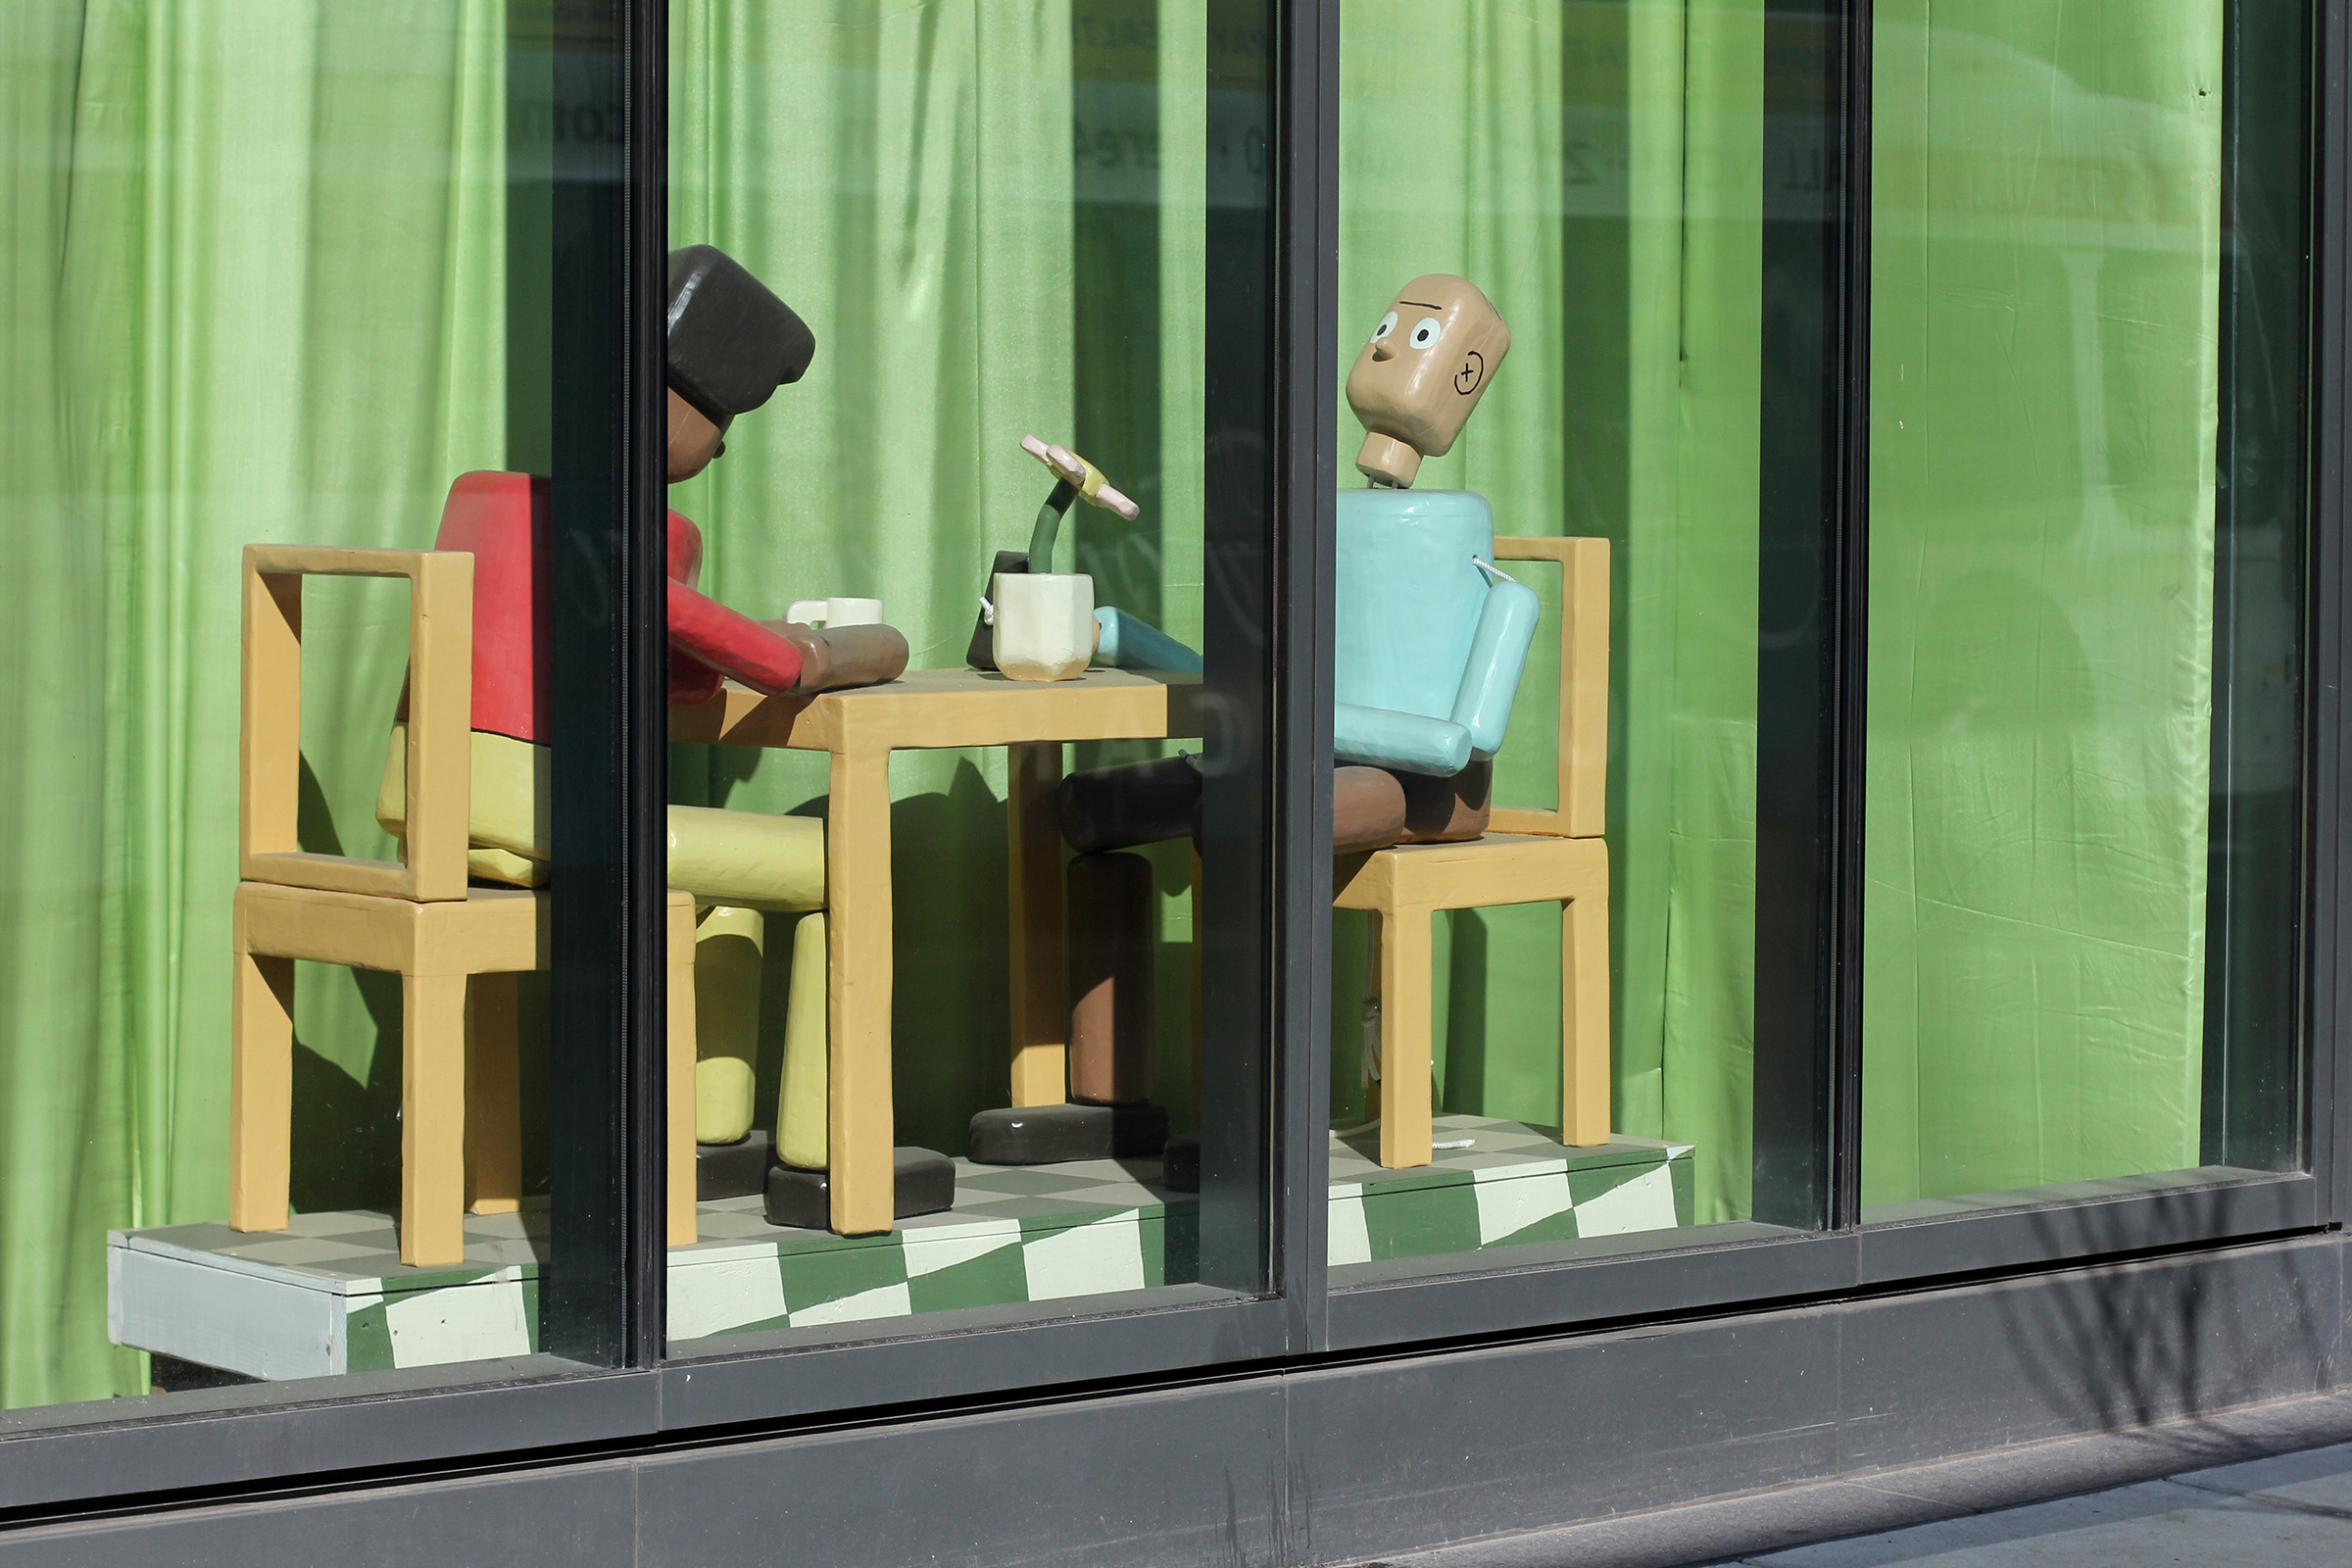 A photograph of two life-size, wooden sculptures painted to look like people sitting at a table, drinking coffee and looking at a phone. The figures resemble push puppet toys.